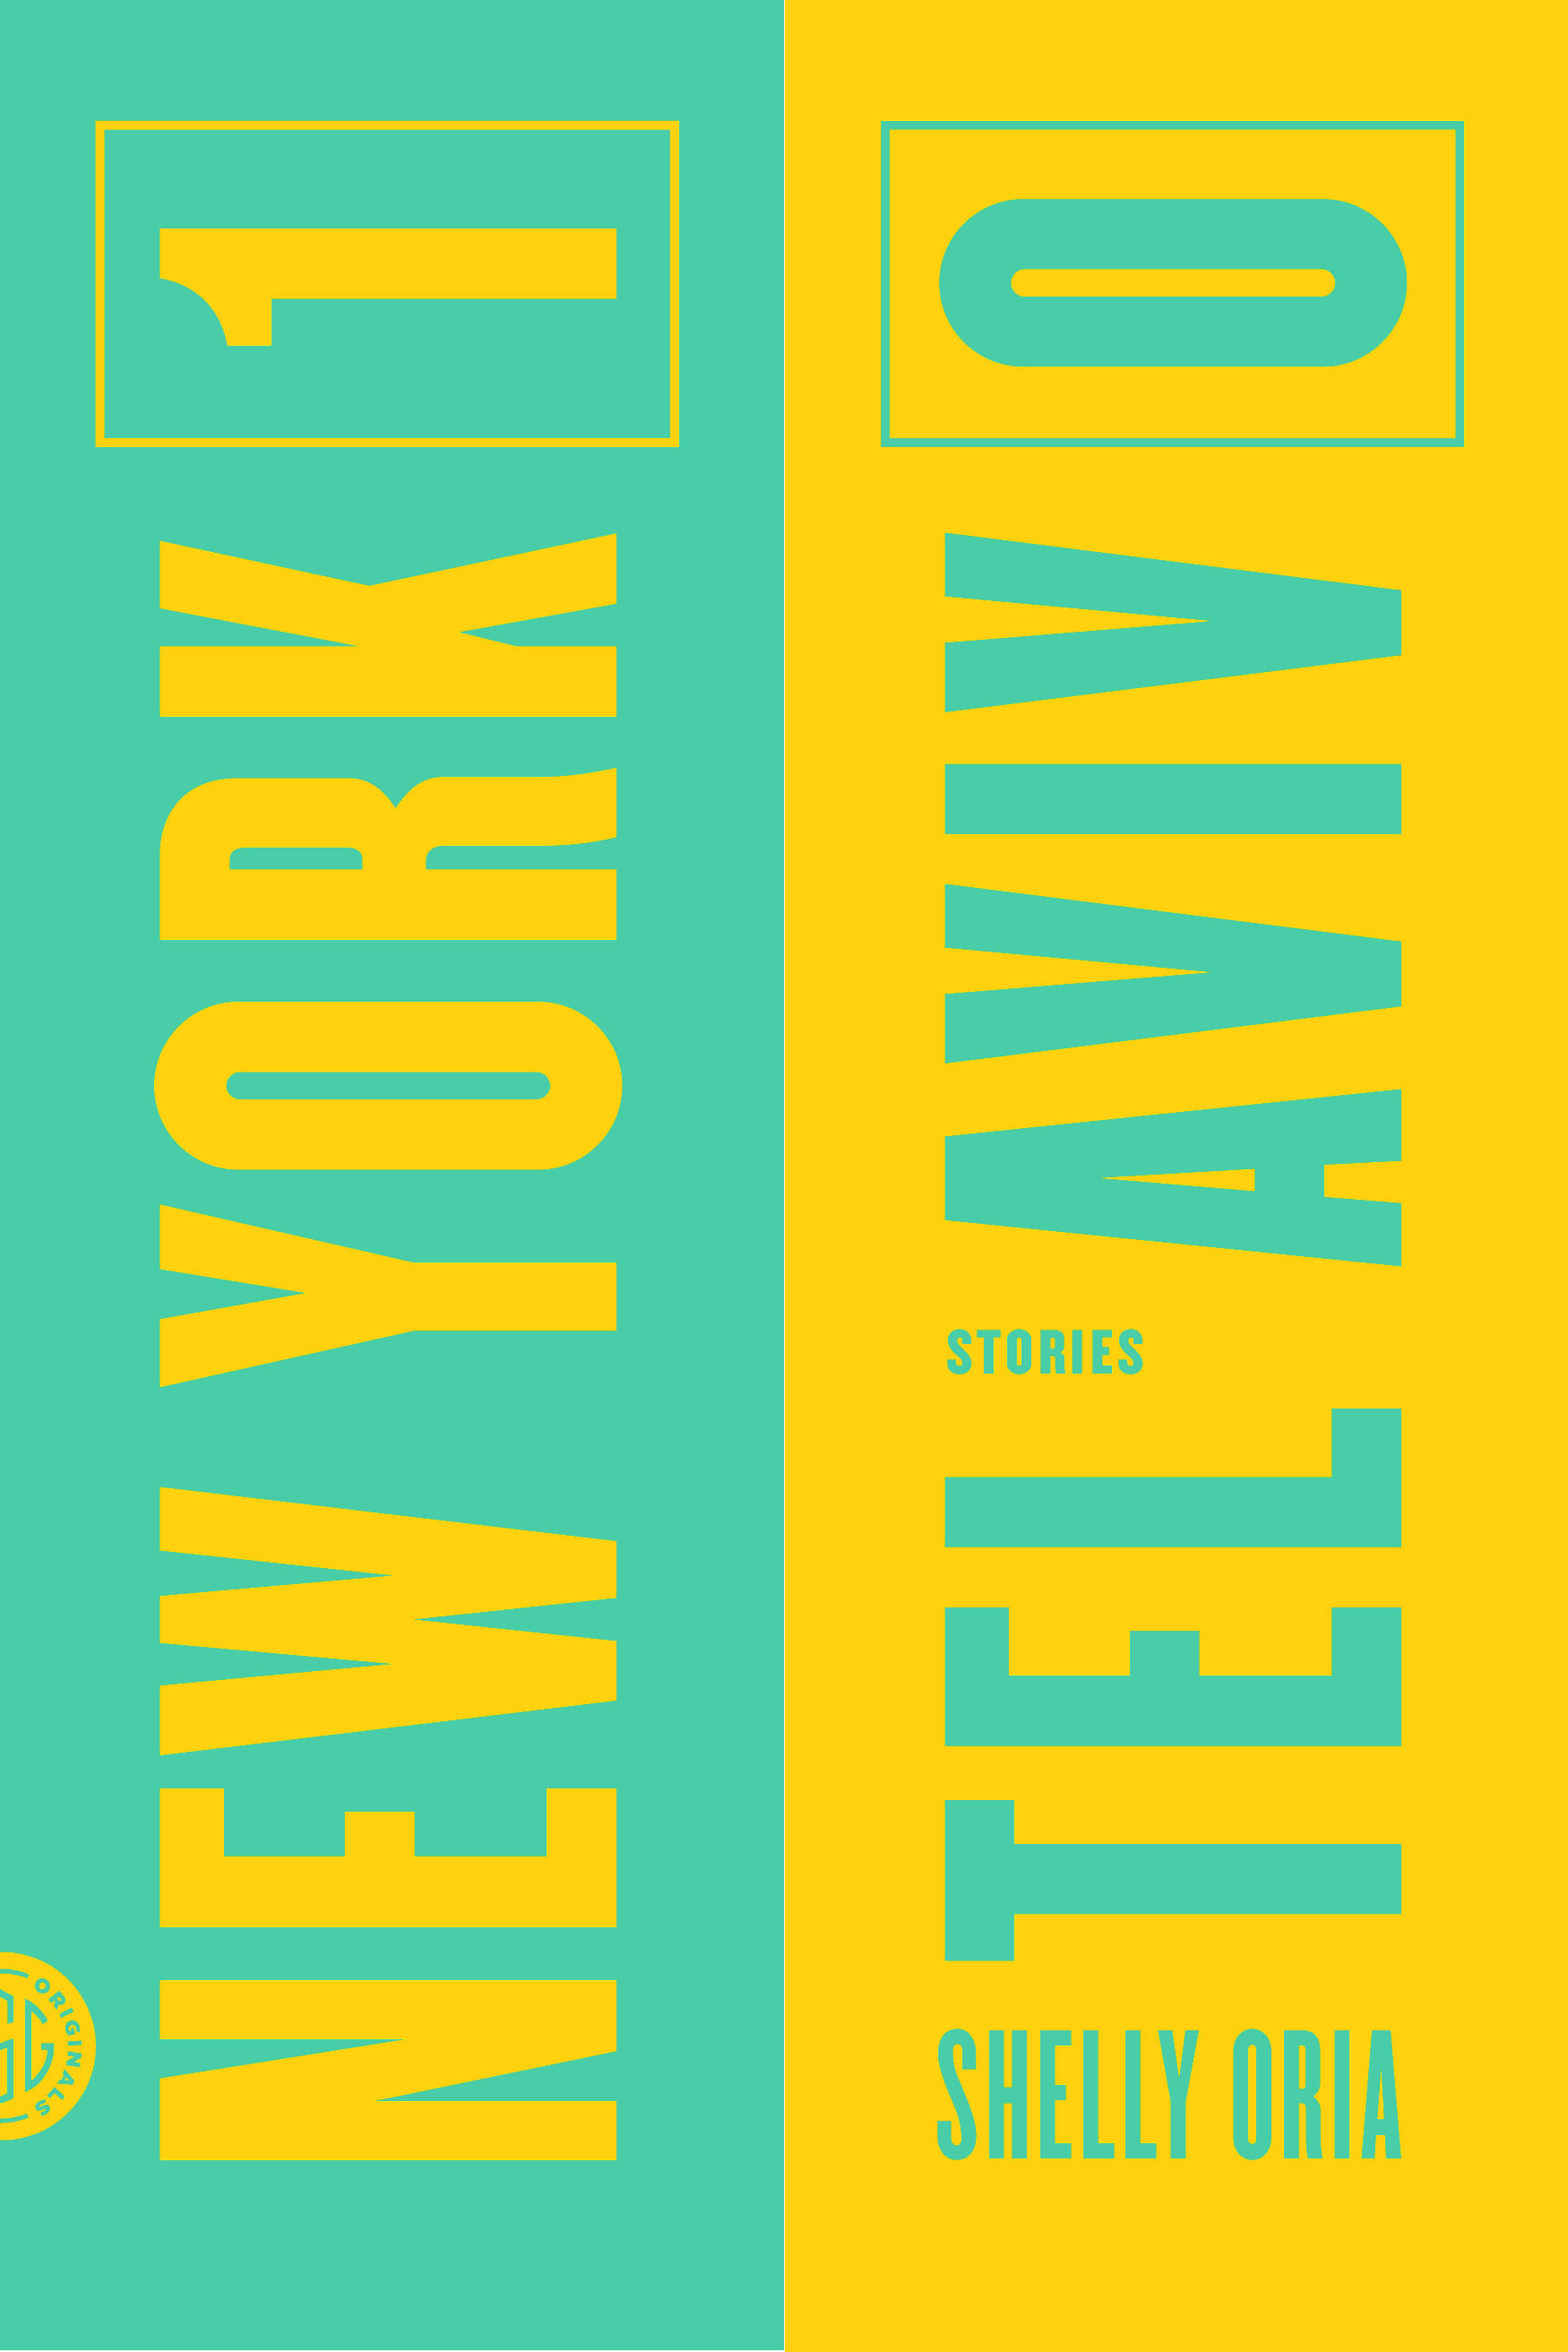 Book Launch: New York 1, Tel Aviv 0 by Shelly Oria, with Ben Greenman